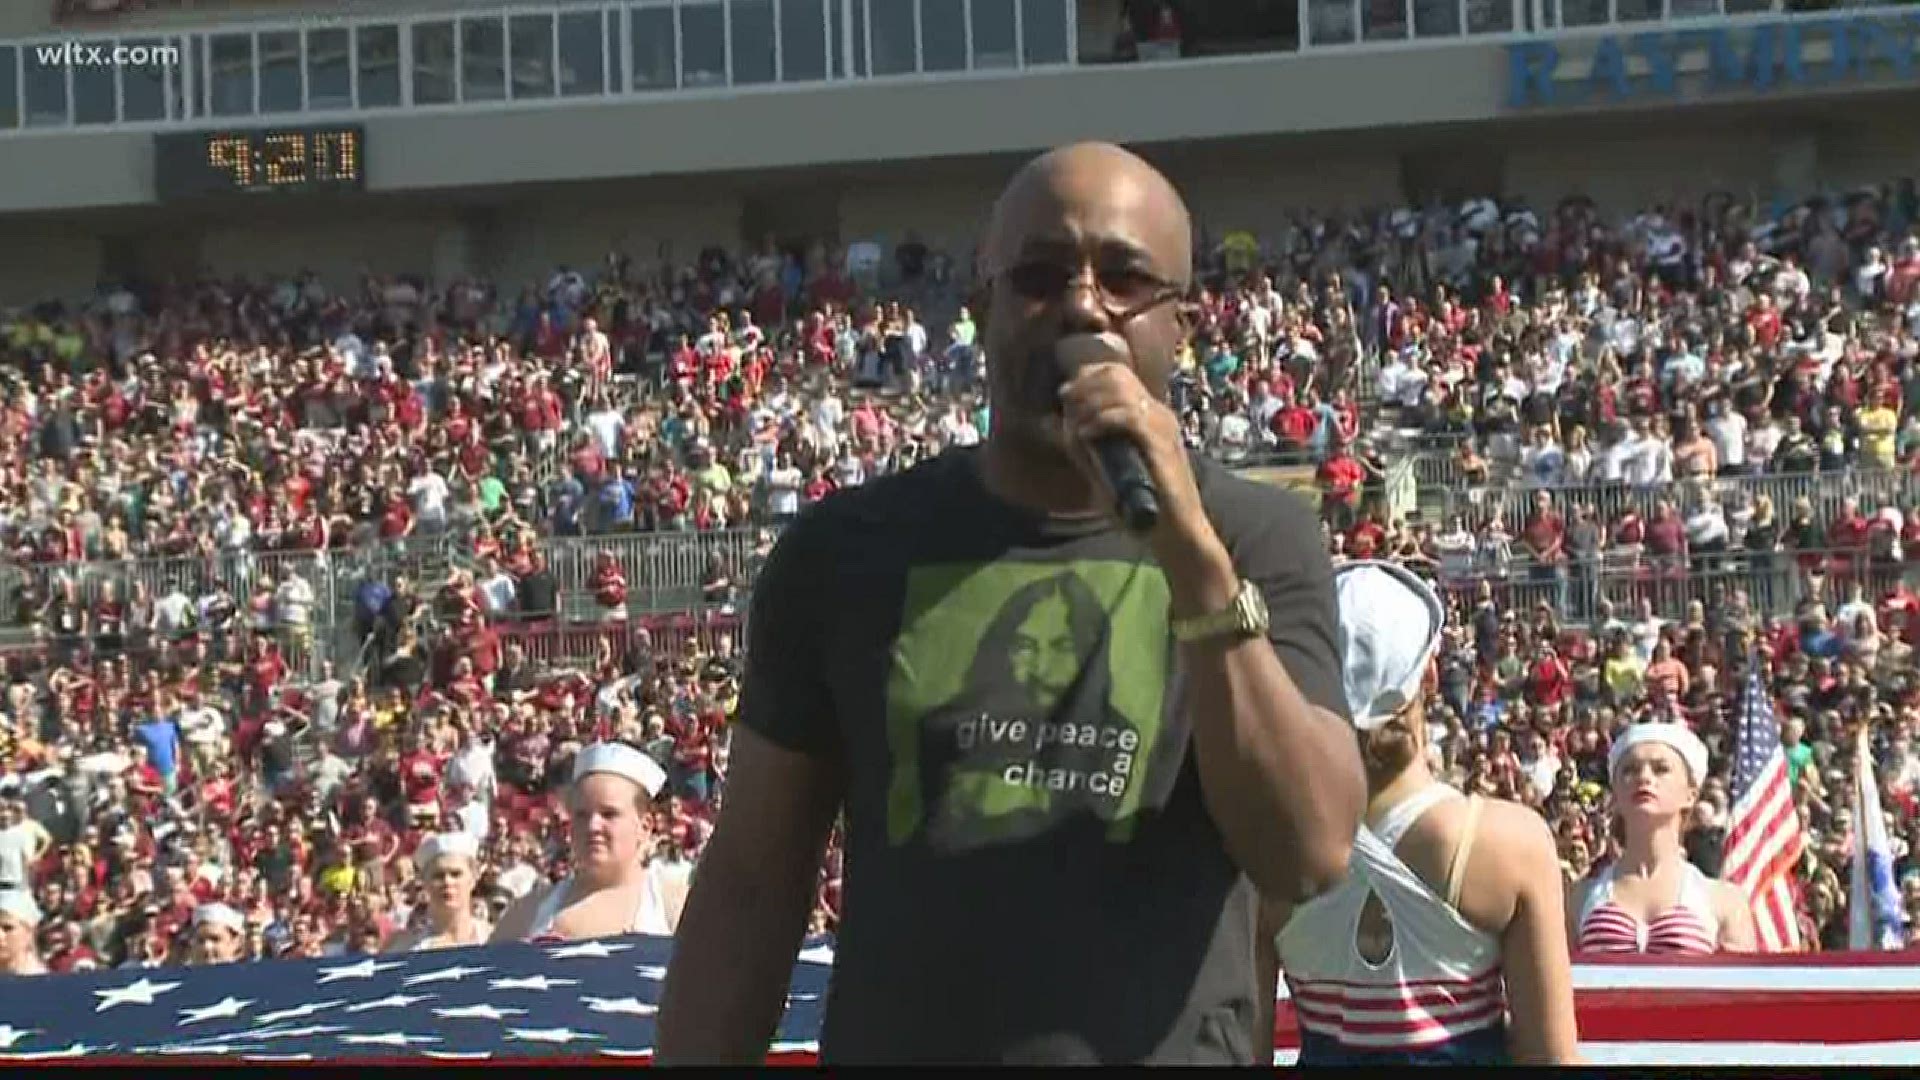 The first national sporting event in more than two months will take place in the Pee Dee with Darius Rucker performing the National Anthem.